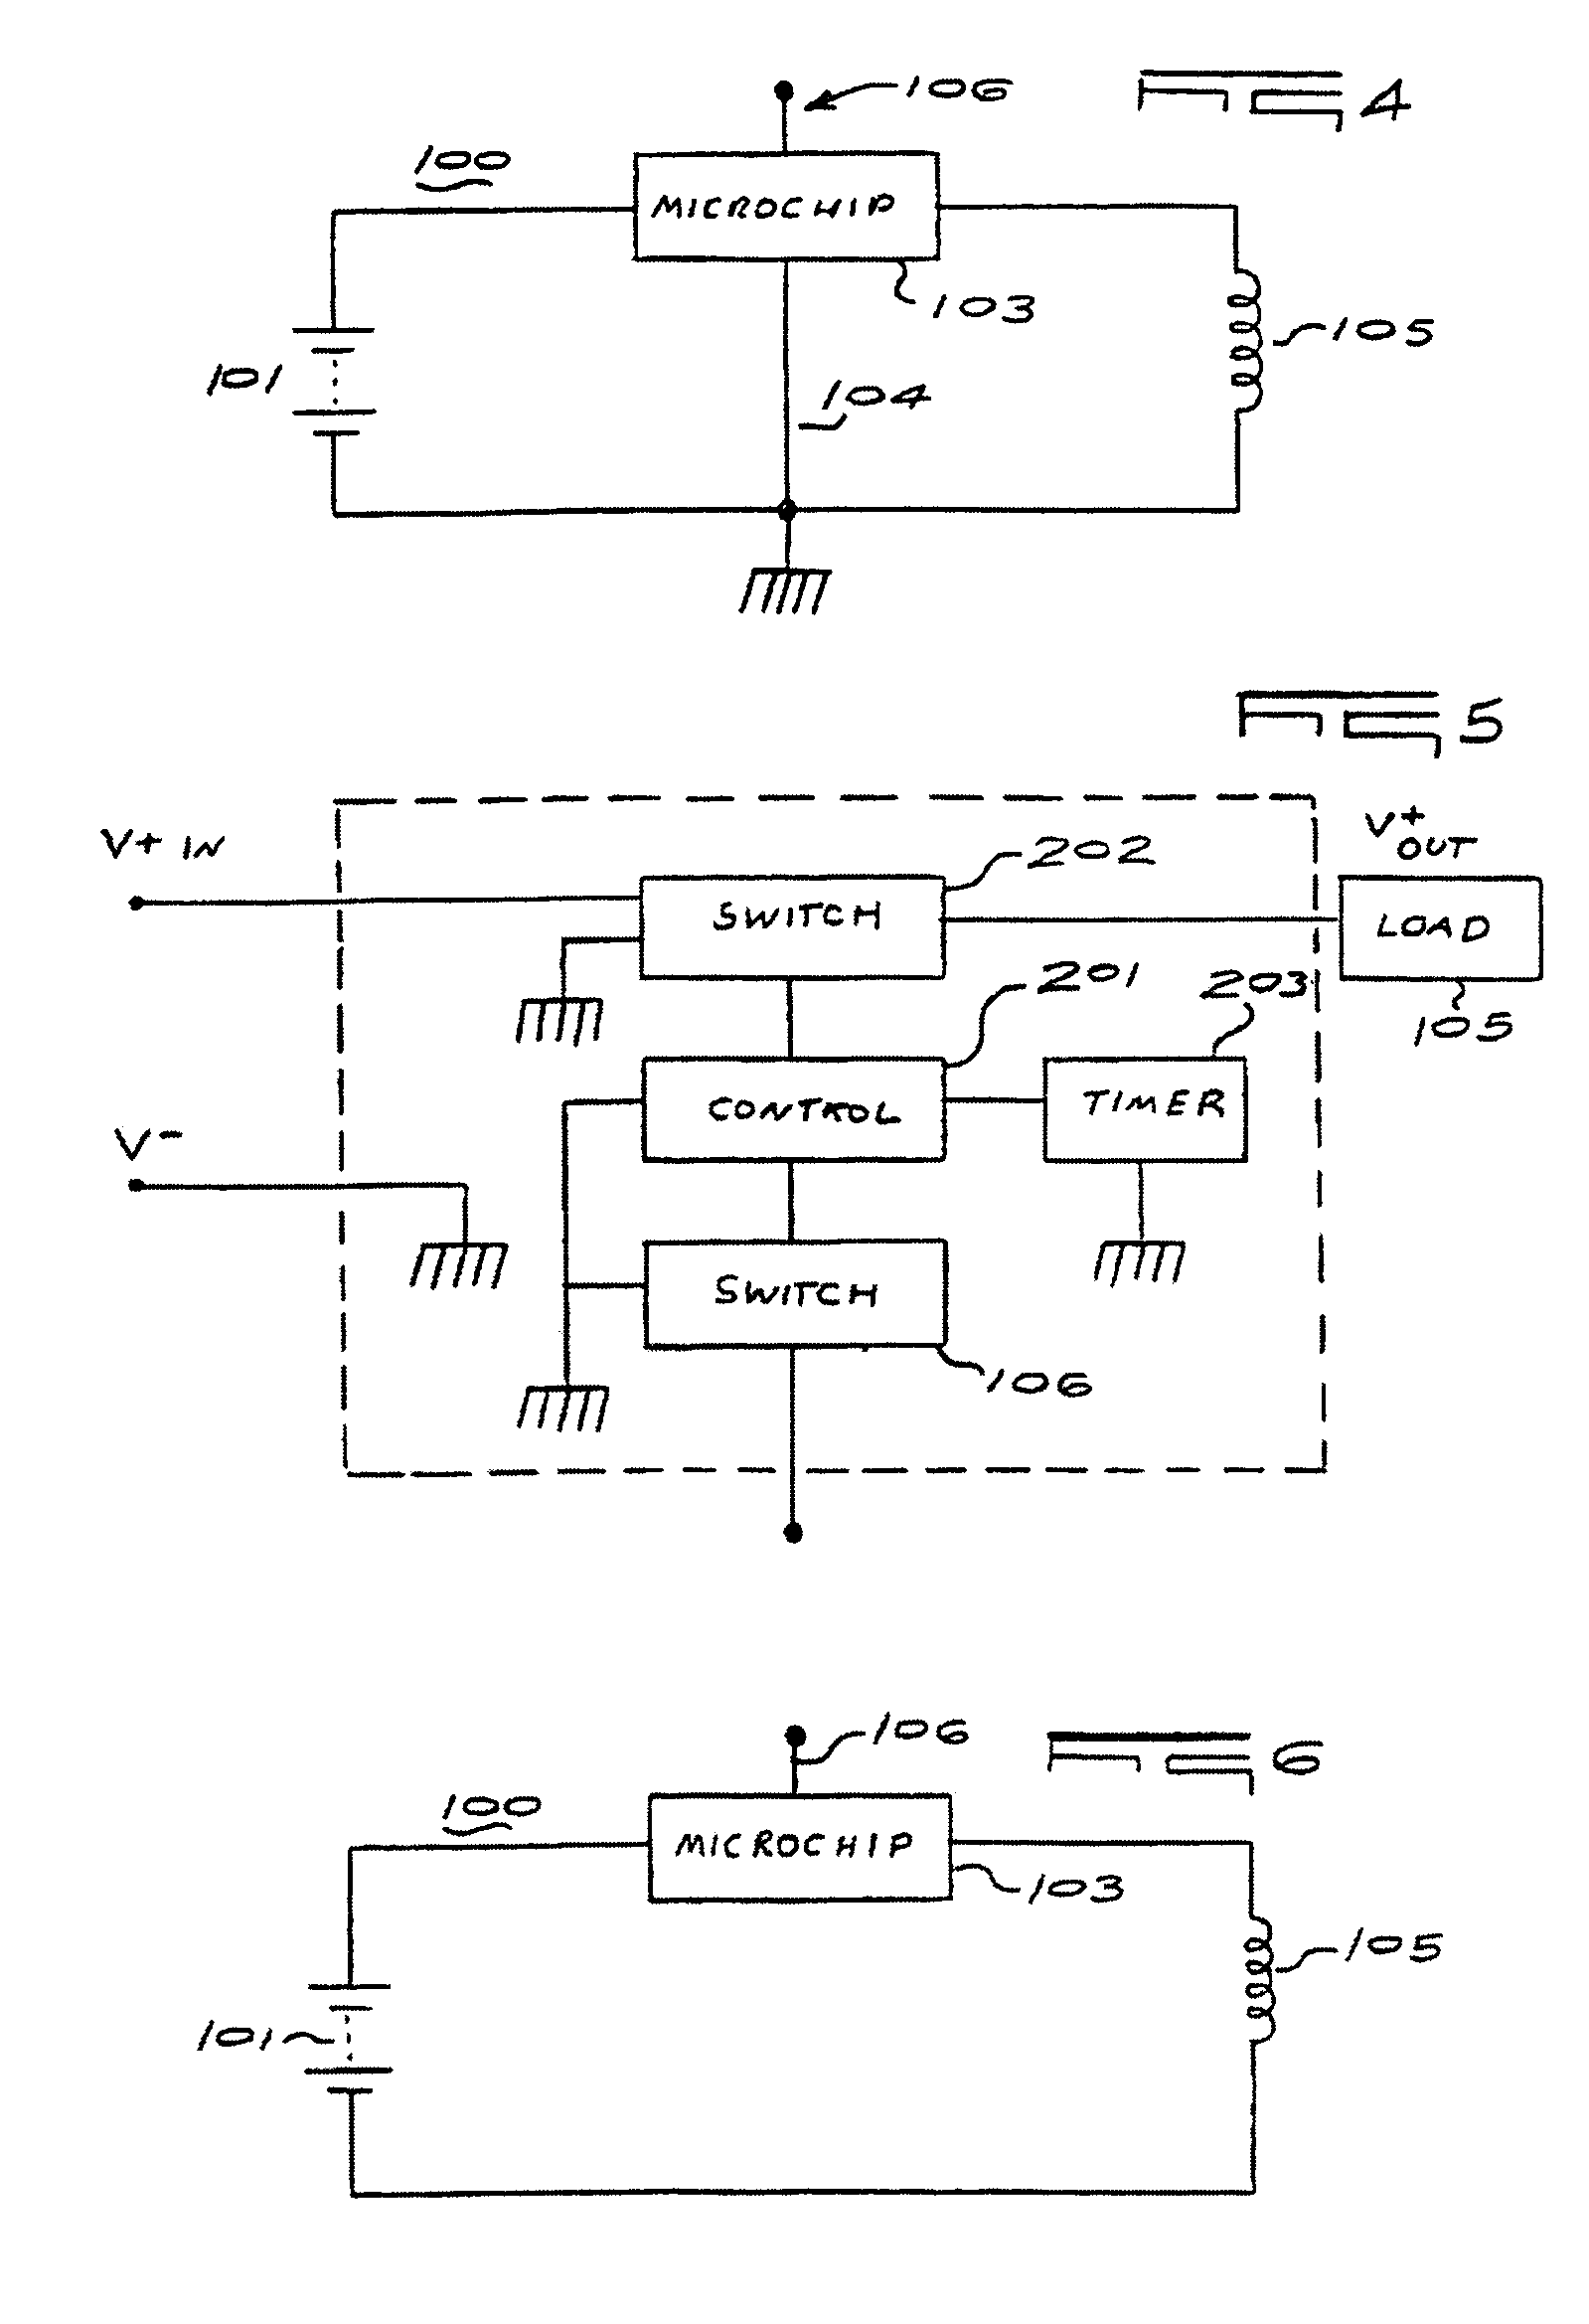 Pressure sensitive switches including touch sensor structures